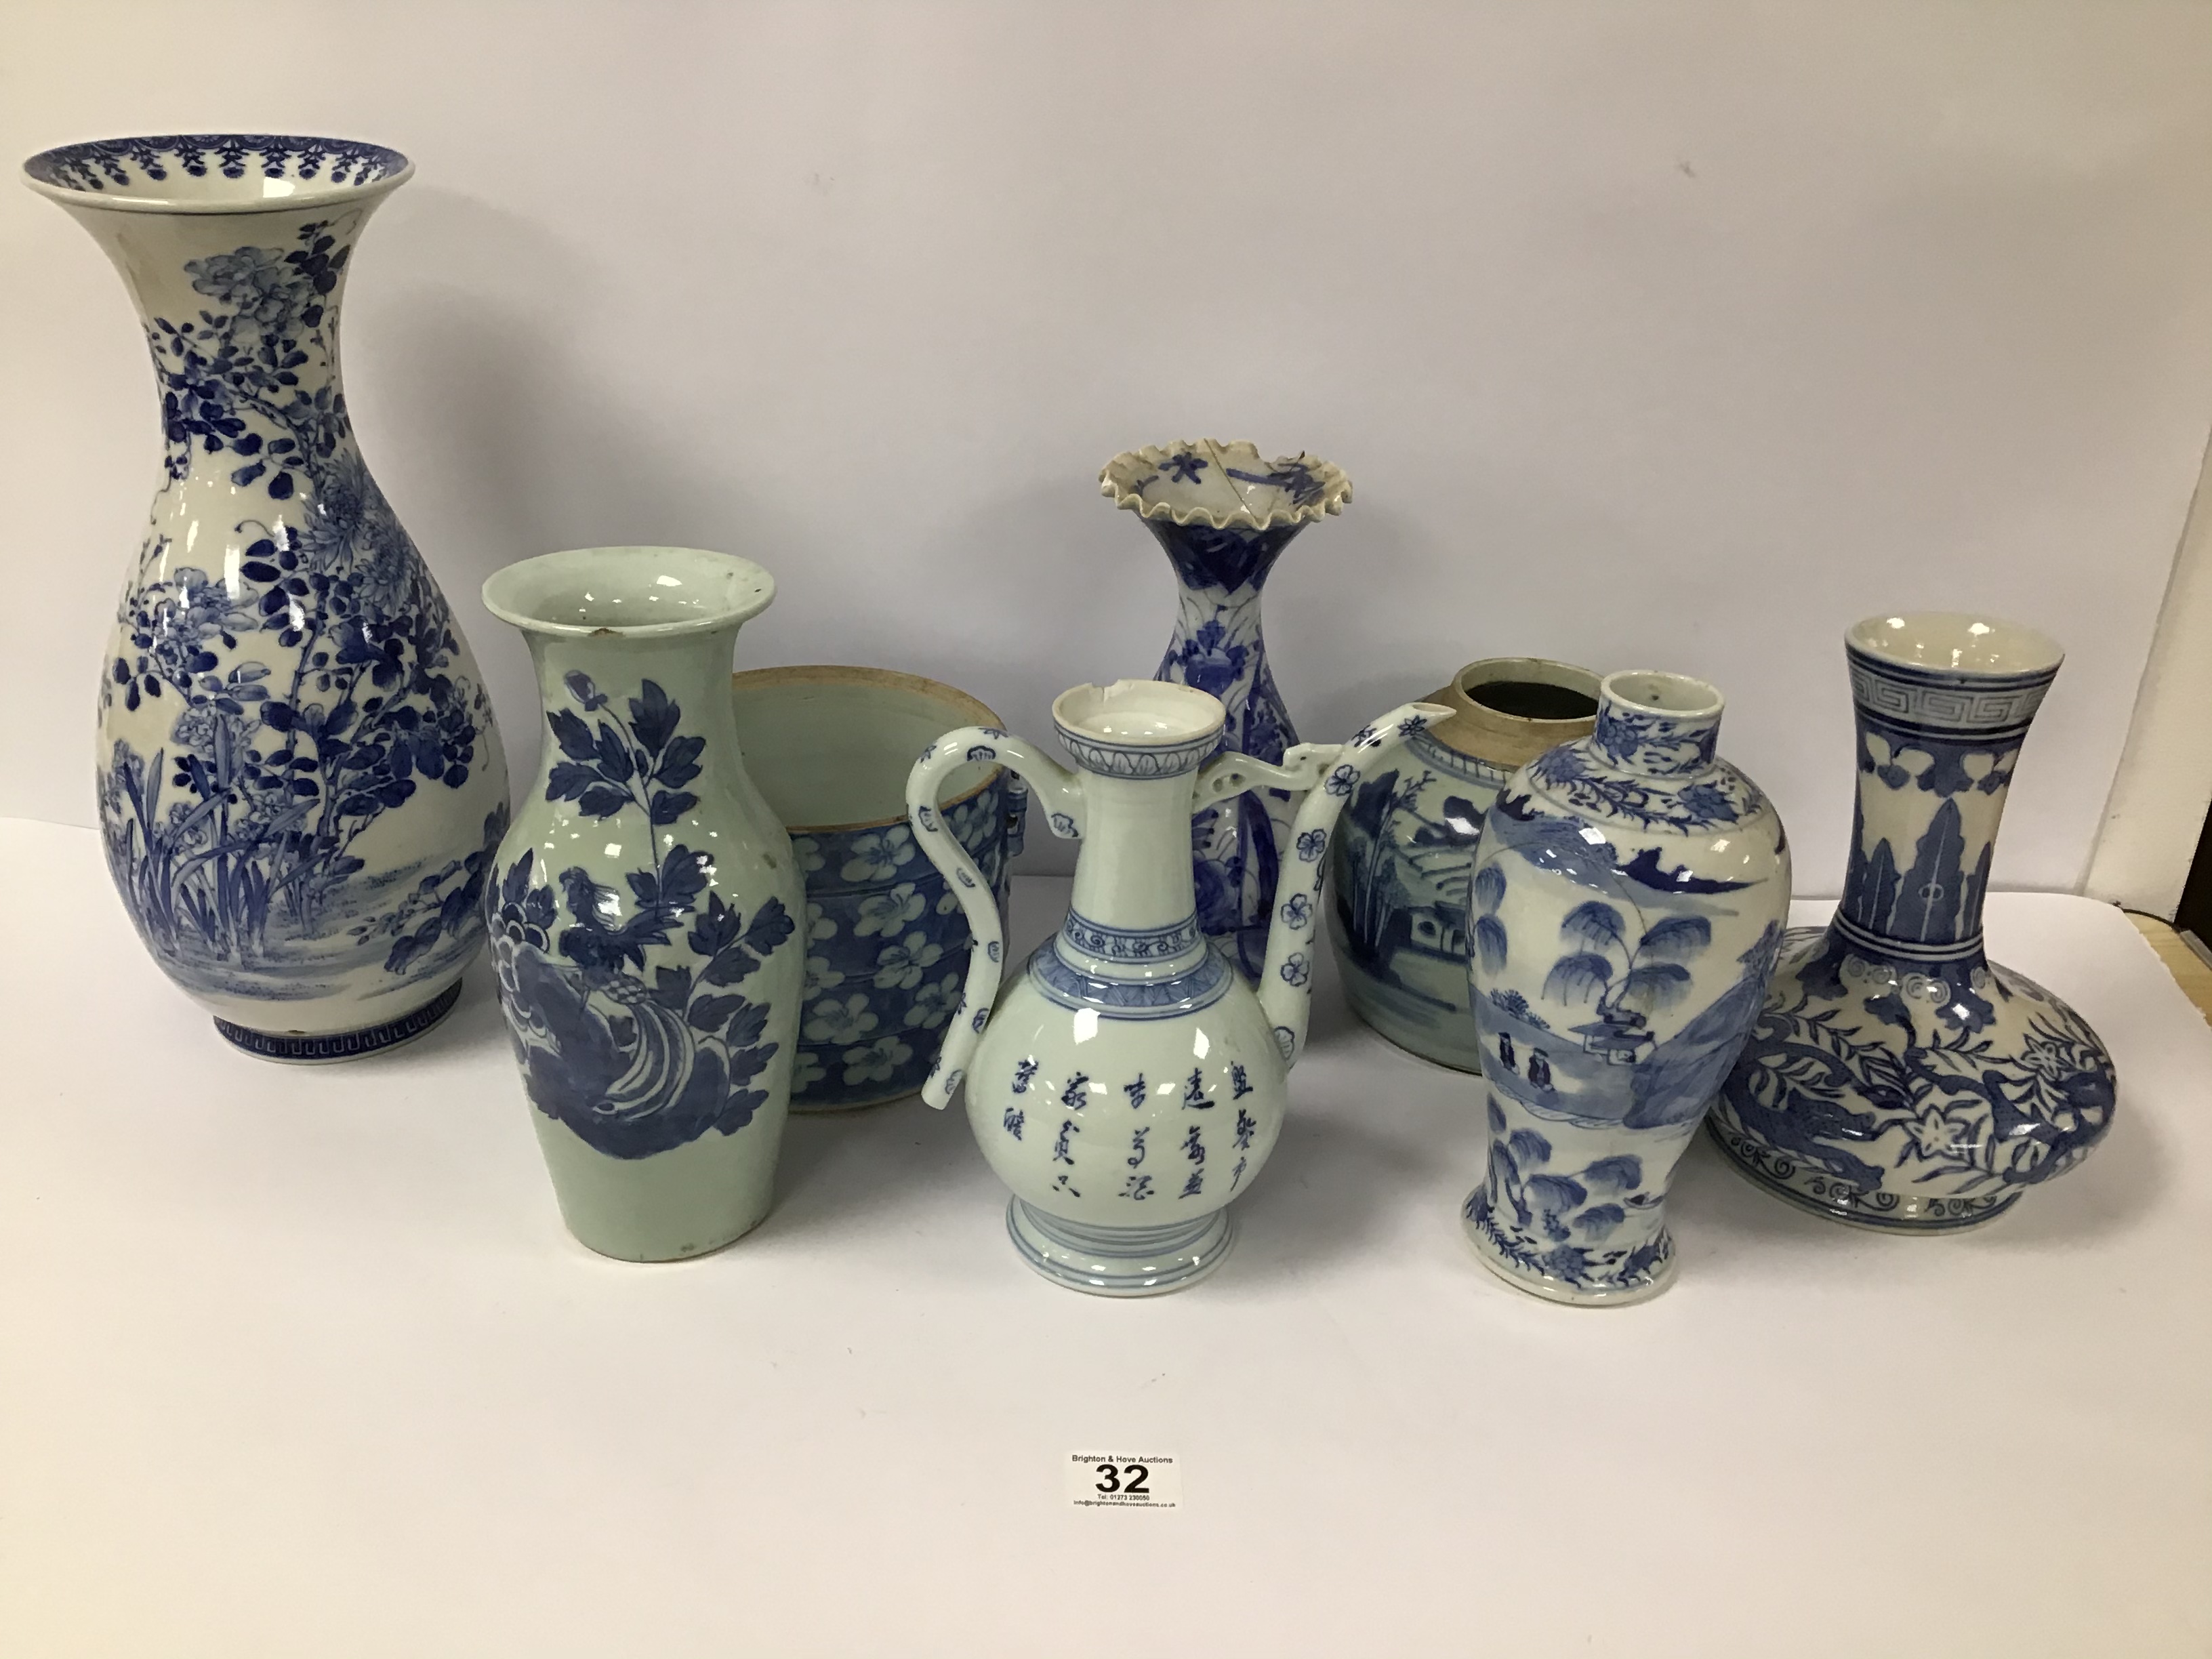 EIGHT PIECES OF CHINESE BLUE AND WHITE PORCELAIN OF VARYING AGES AND DESIGNS, INCLUDING VASES AND